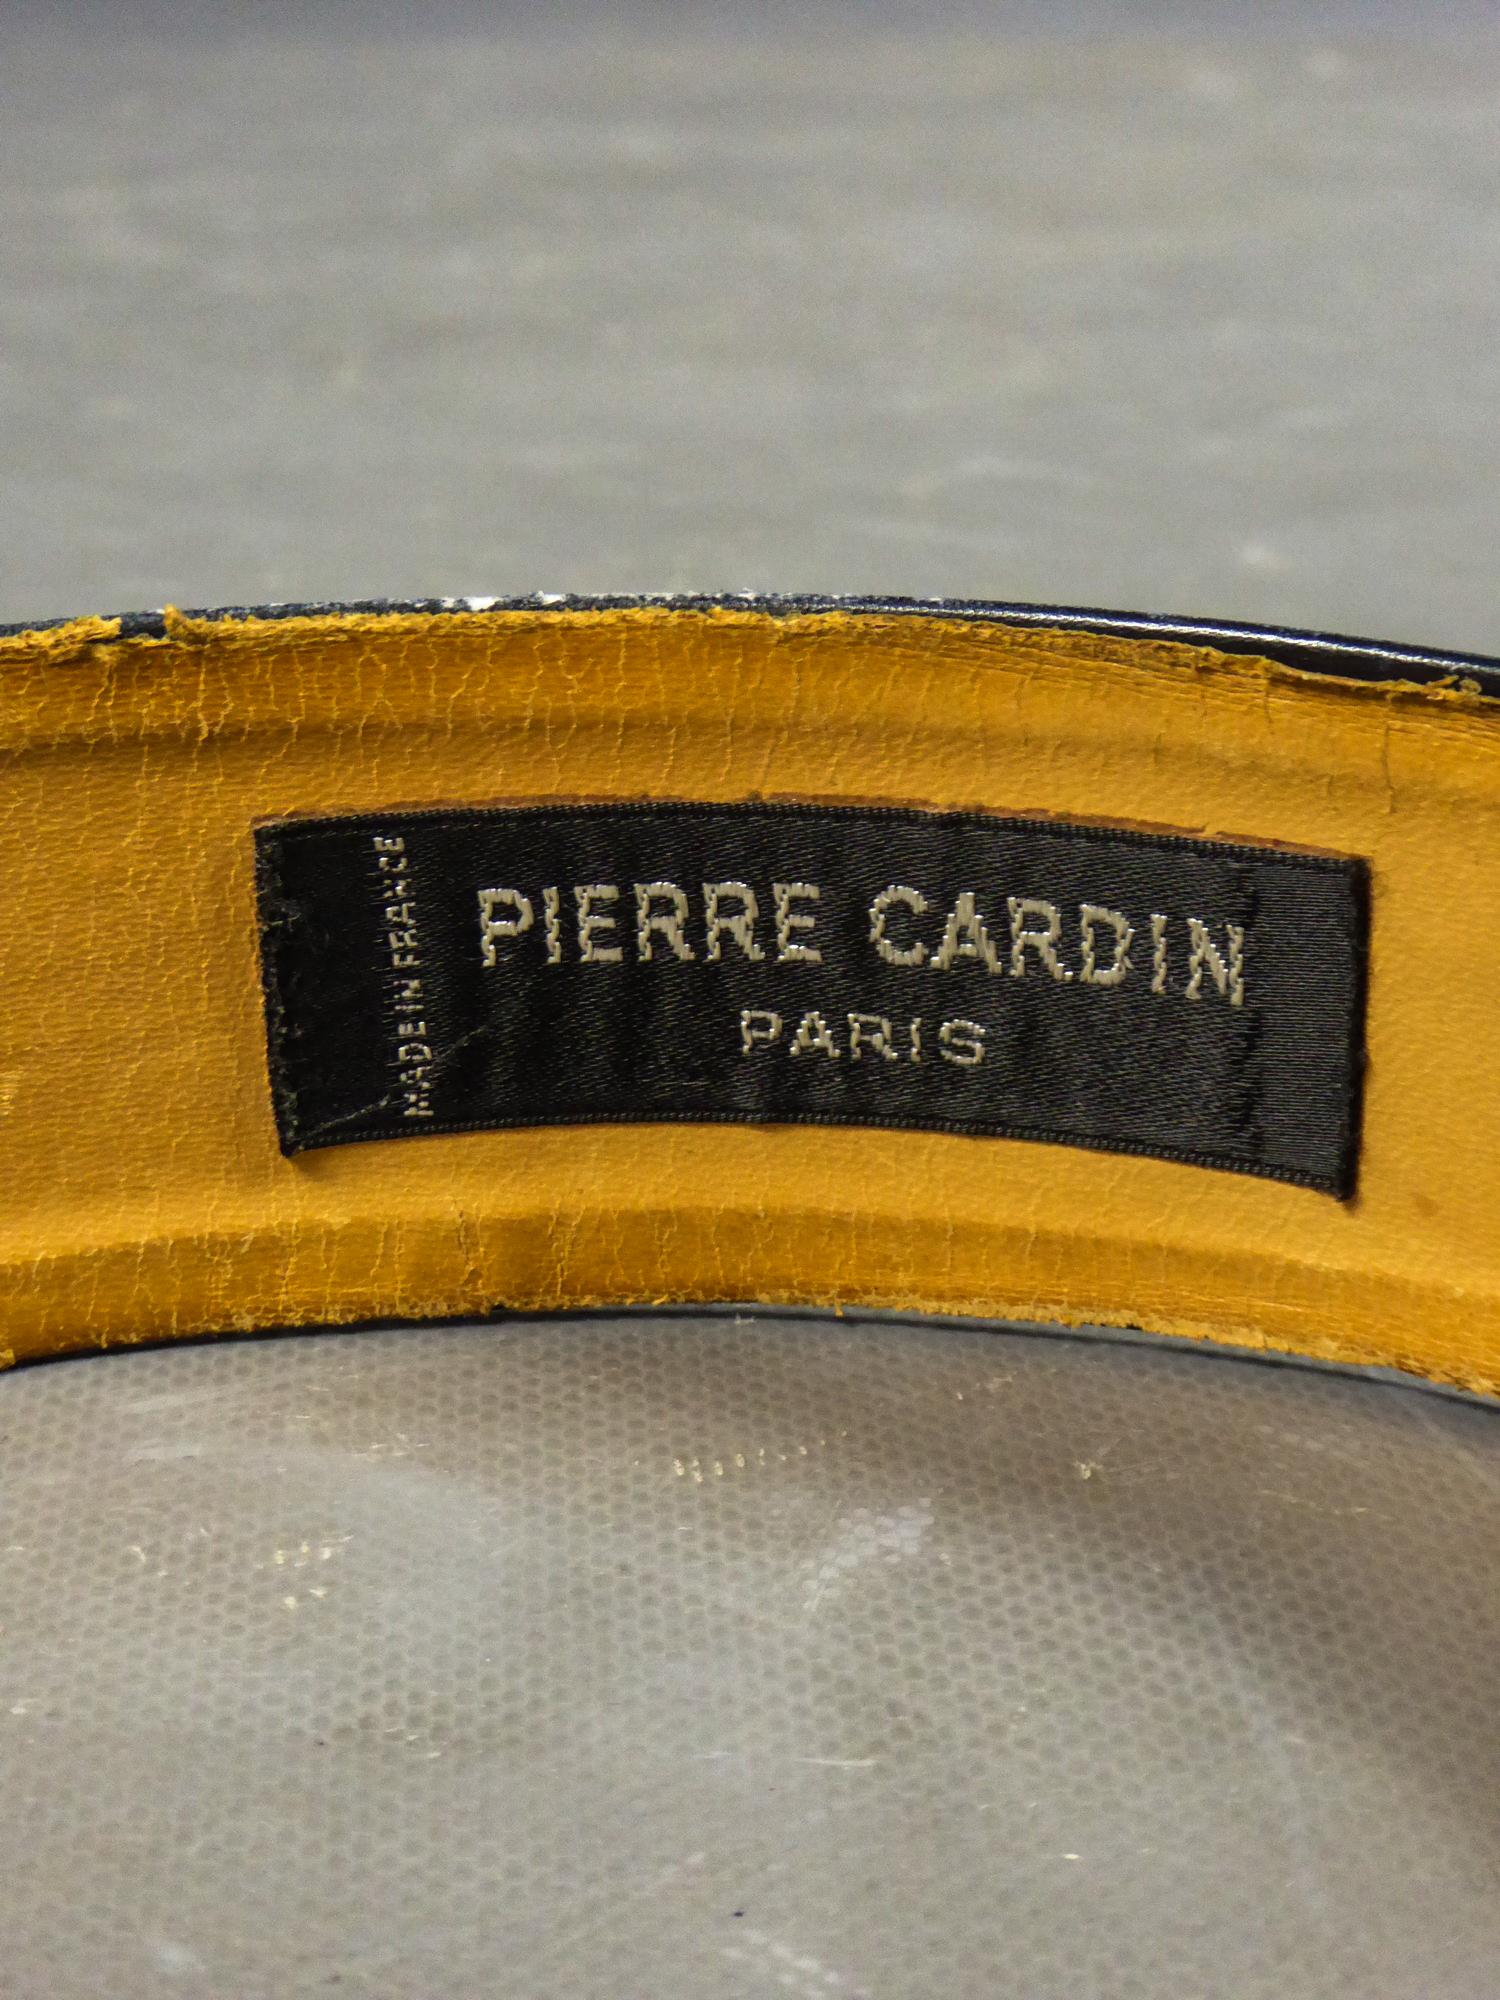 Circa 1970/1980
France

Belt in black leather by Pierre Cardin from the 1970s or 1980s. Belt with minimalist design slightly curved to the shape. Buckle in silver chrome-plated steel representing the famous Pierre Cardin logo. Wrong side lined with